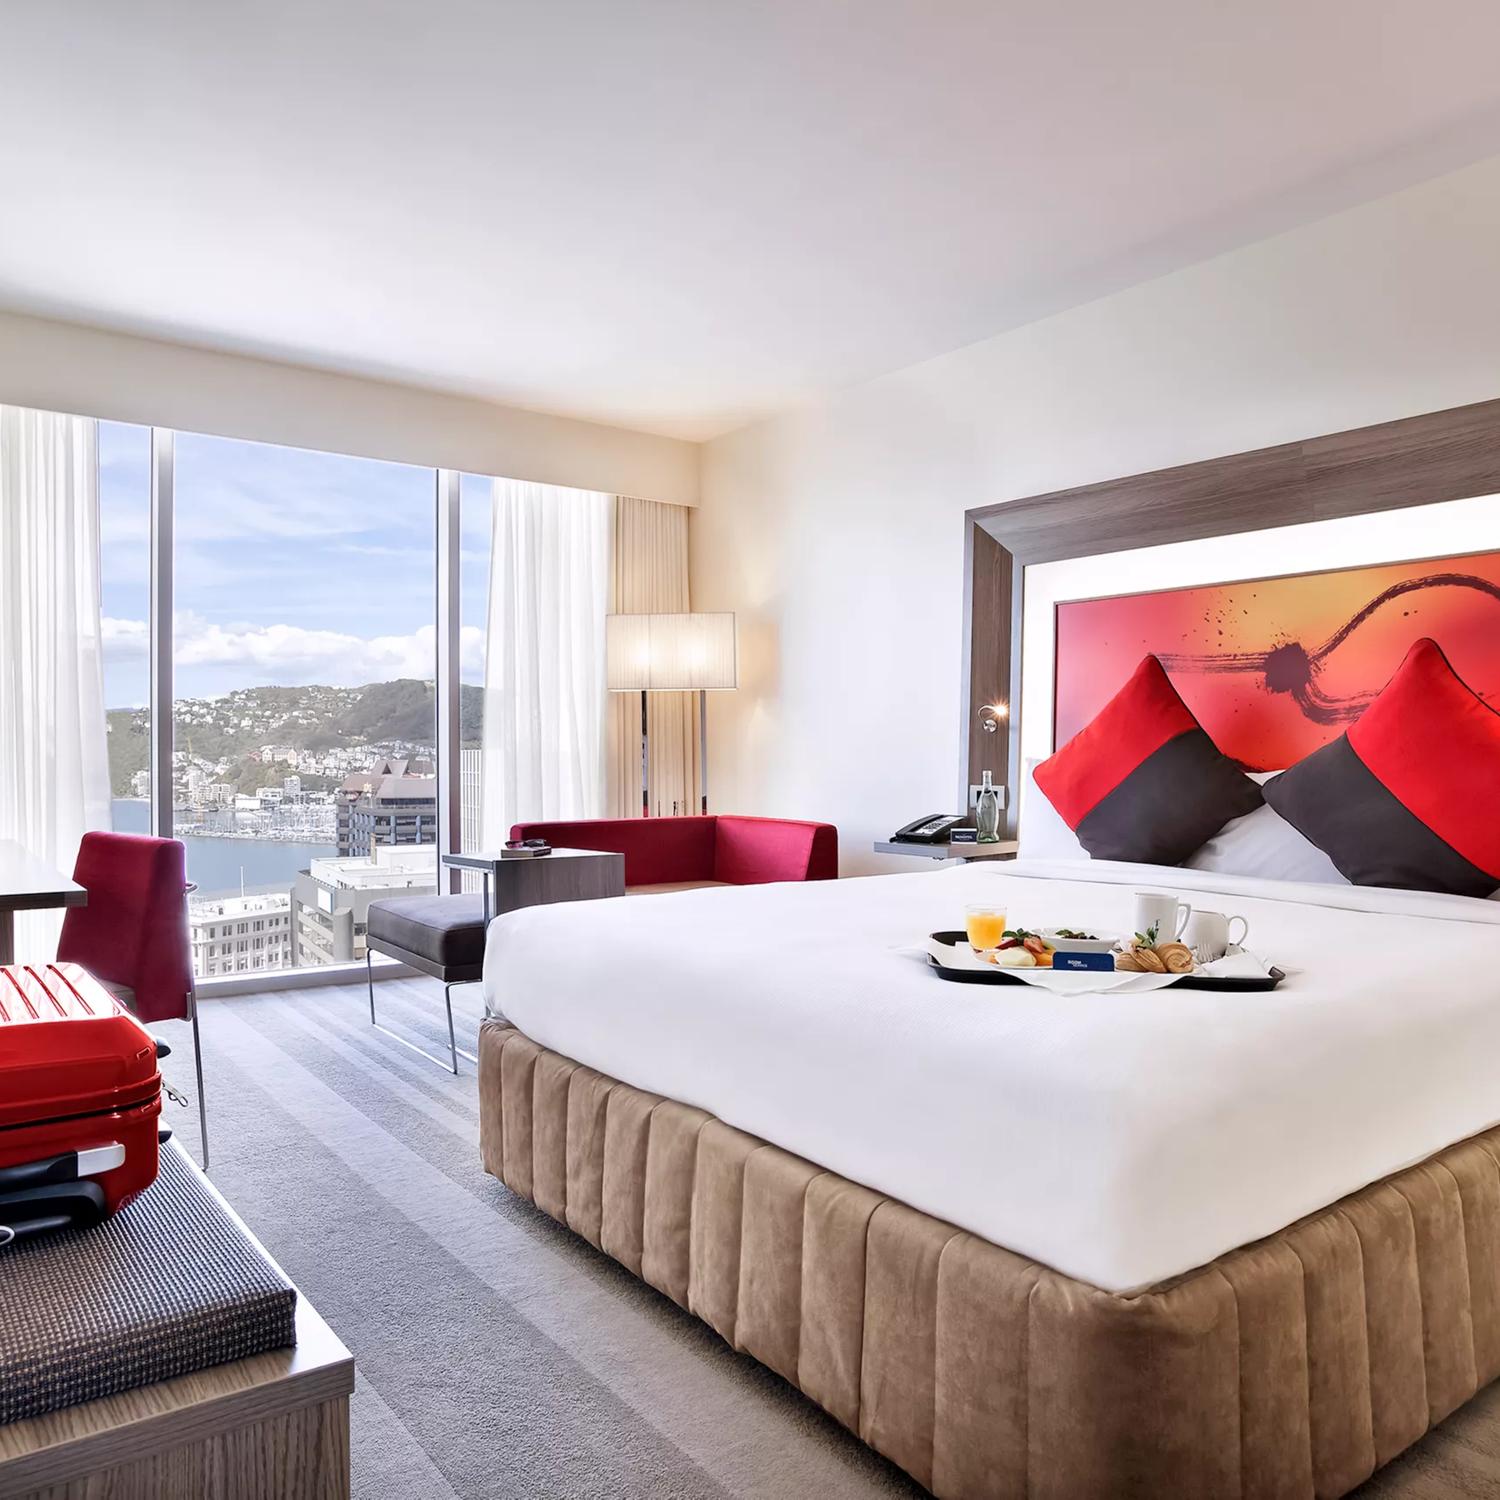 The Executive King Room inside Novotel Wellington overlooking the harbour.